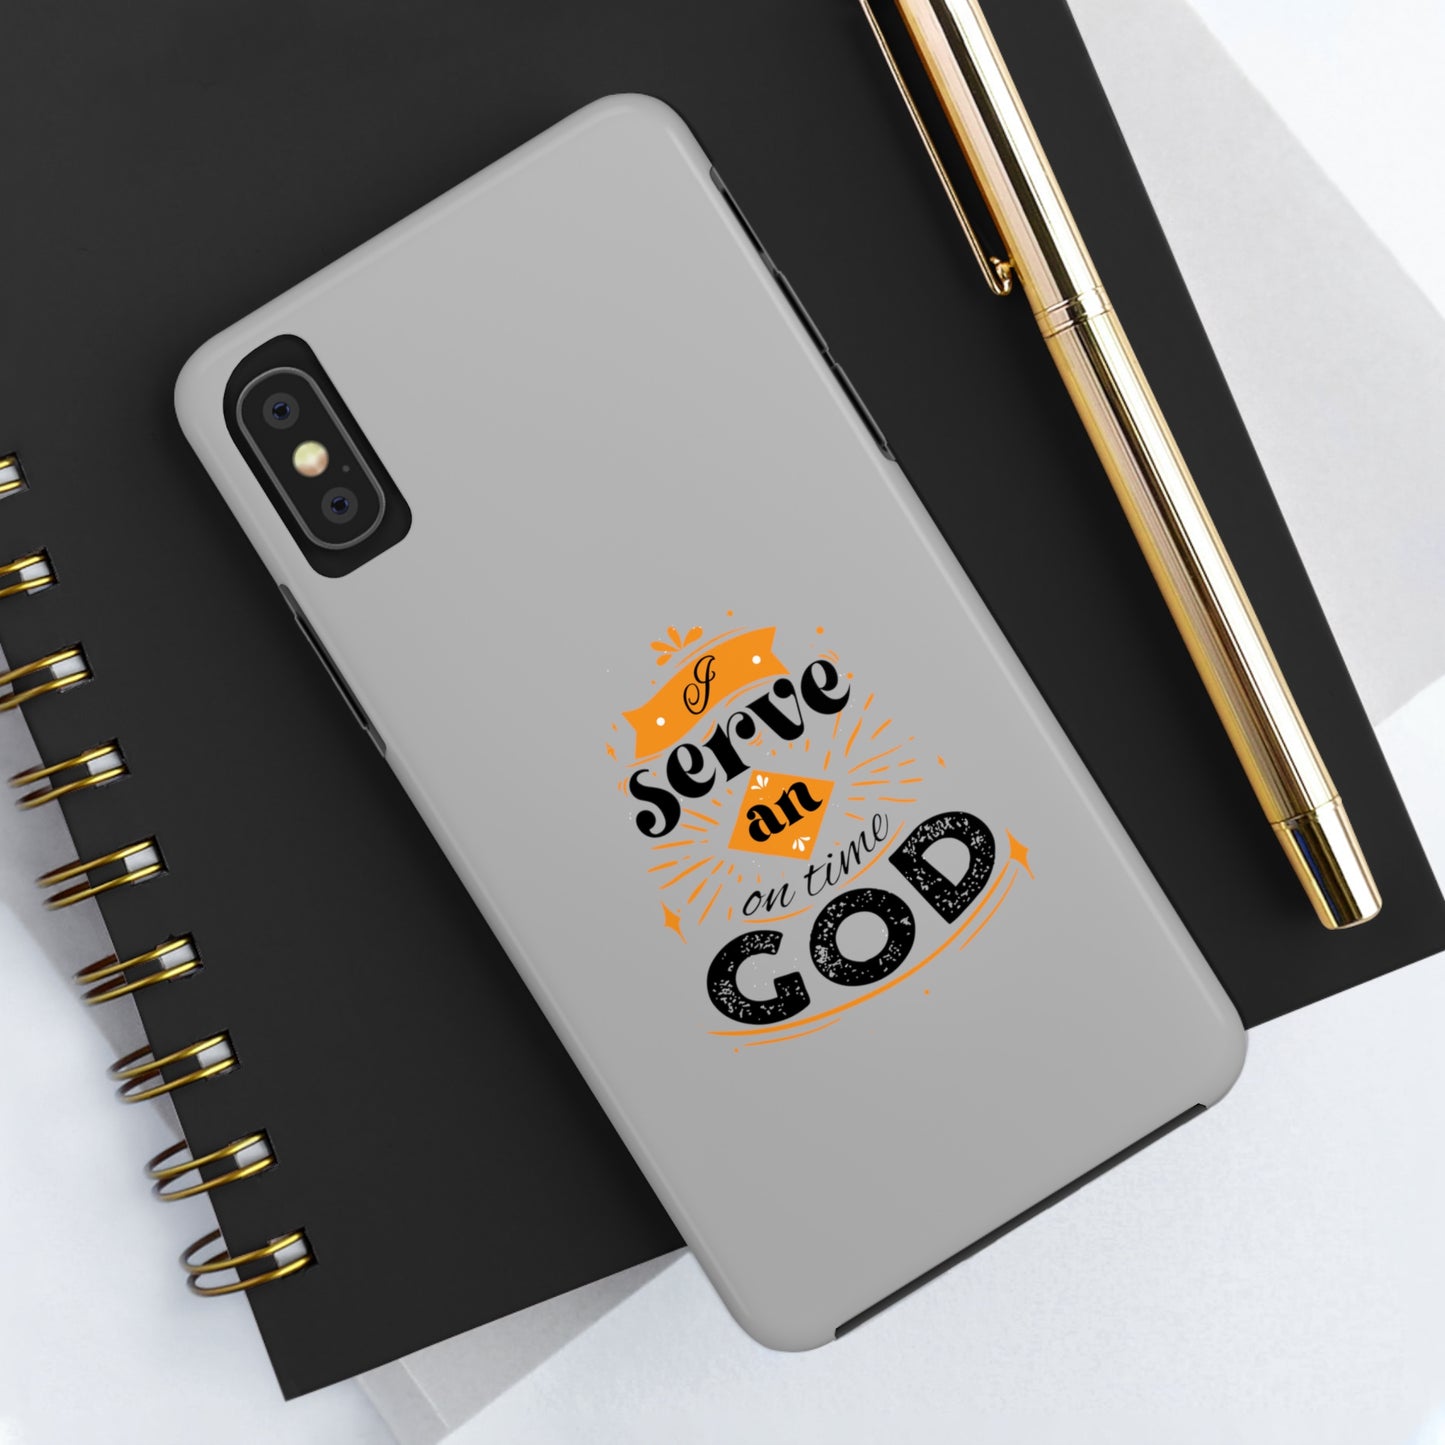 I Serve An On Time God Tough Phone Cases, Case-Mate